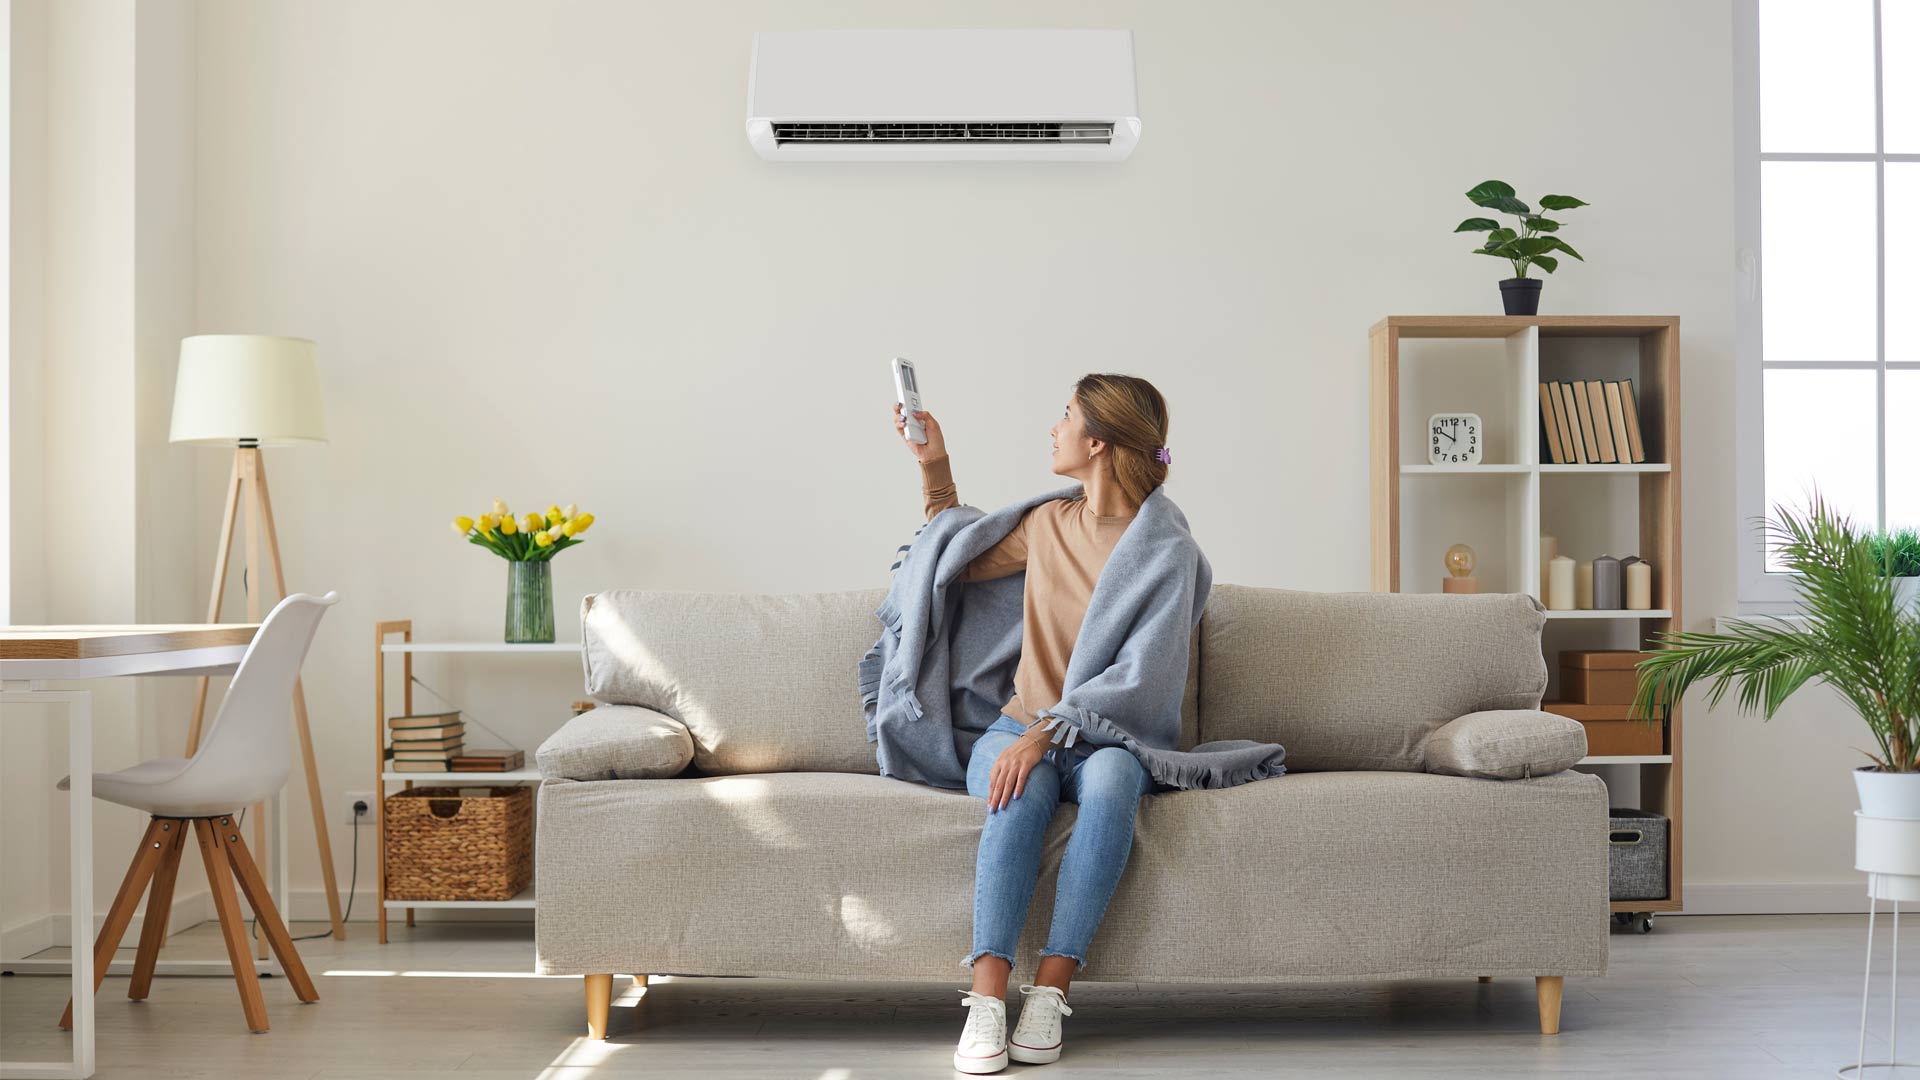 Woman on couch using air conditioning remote